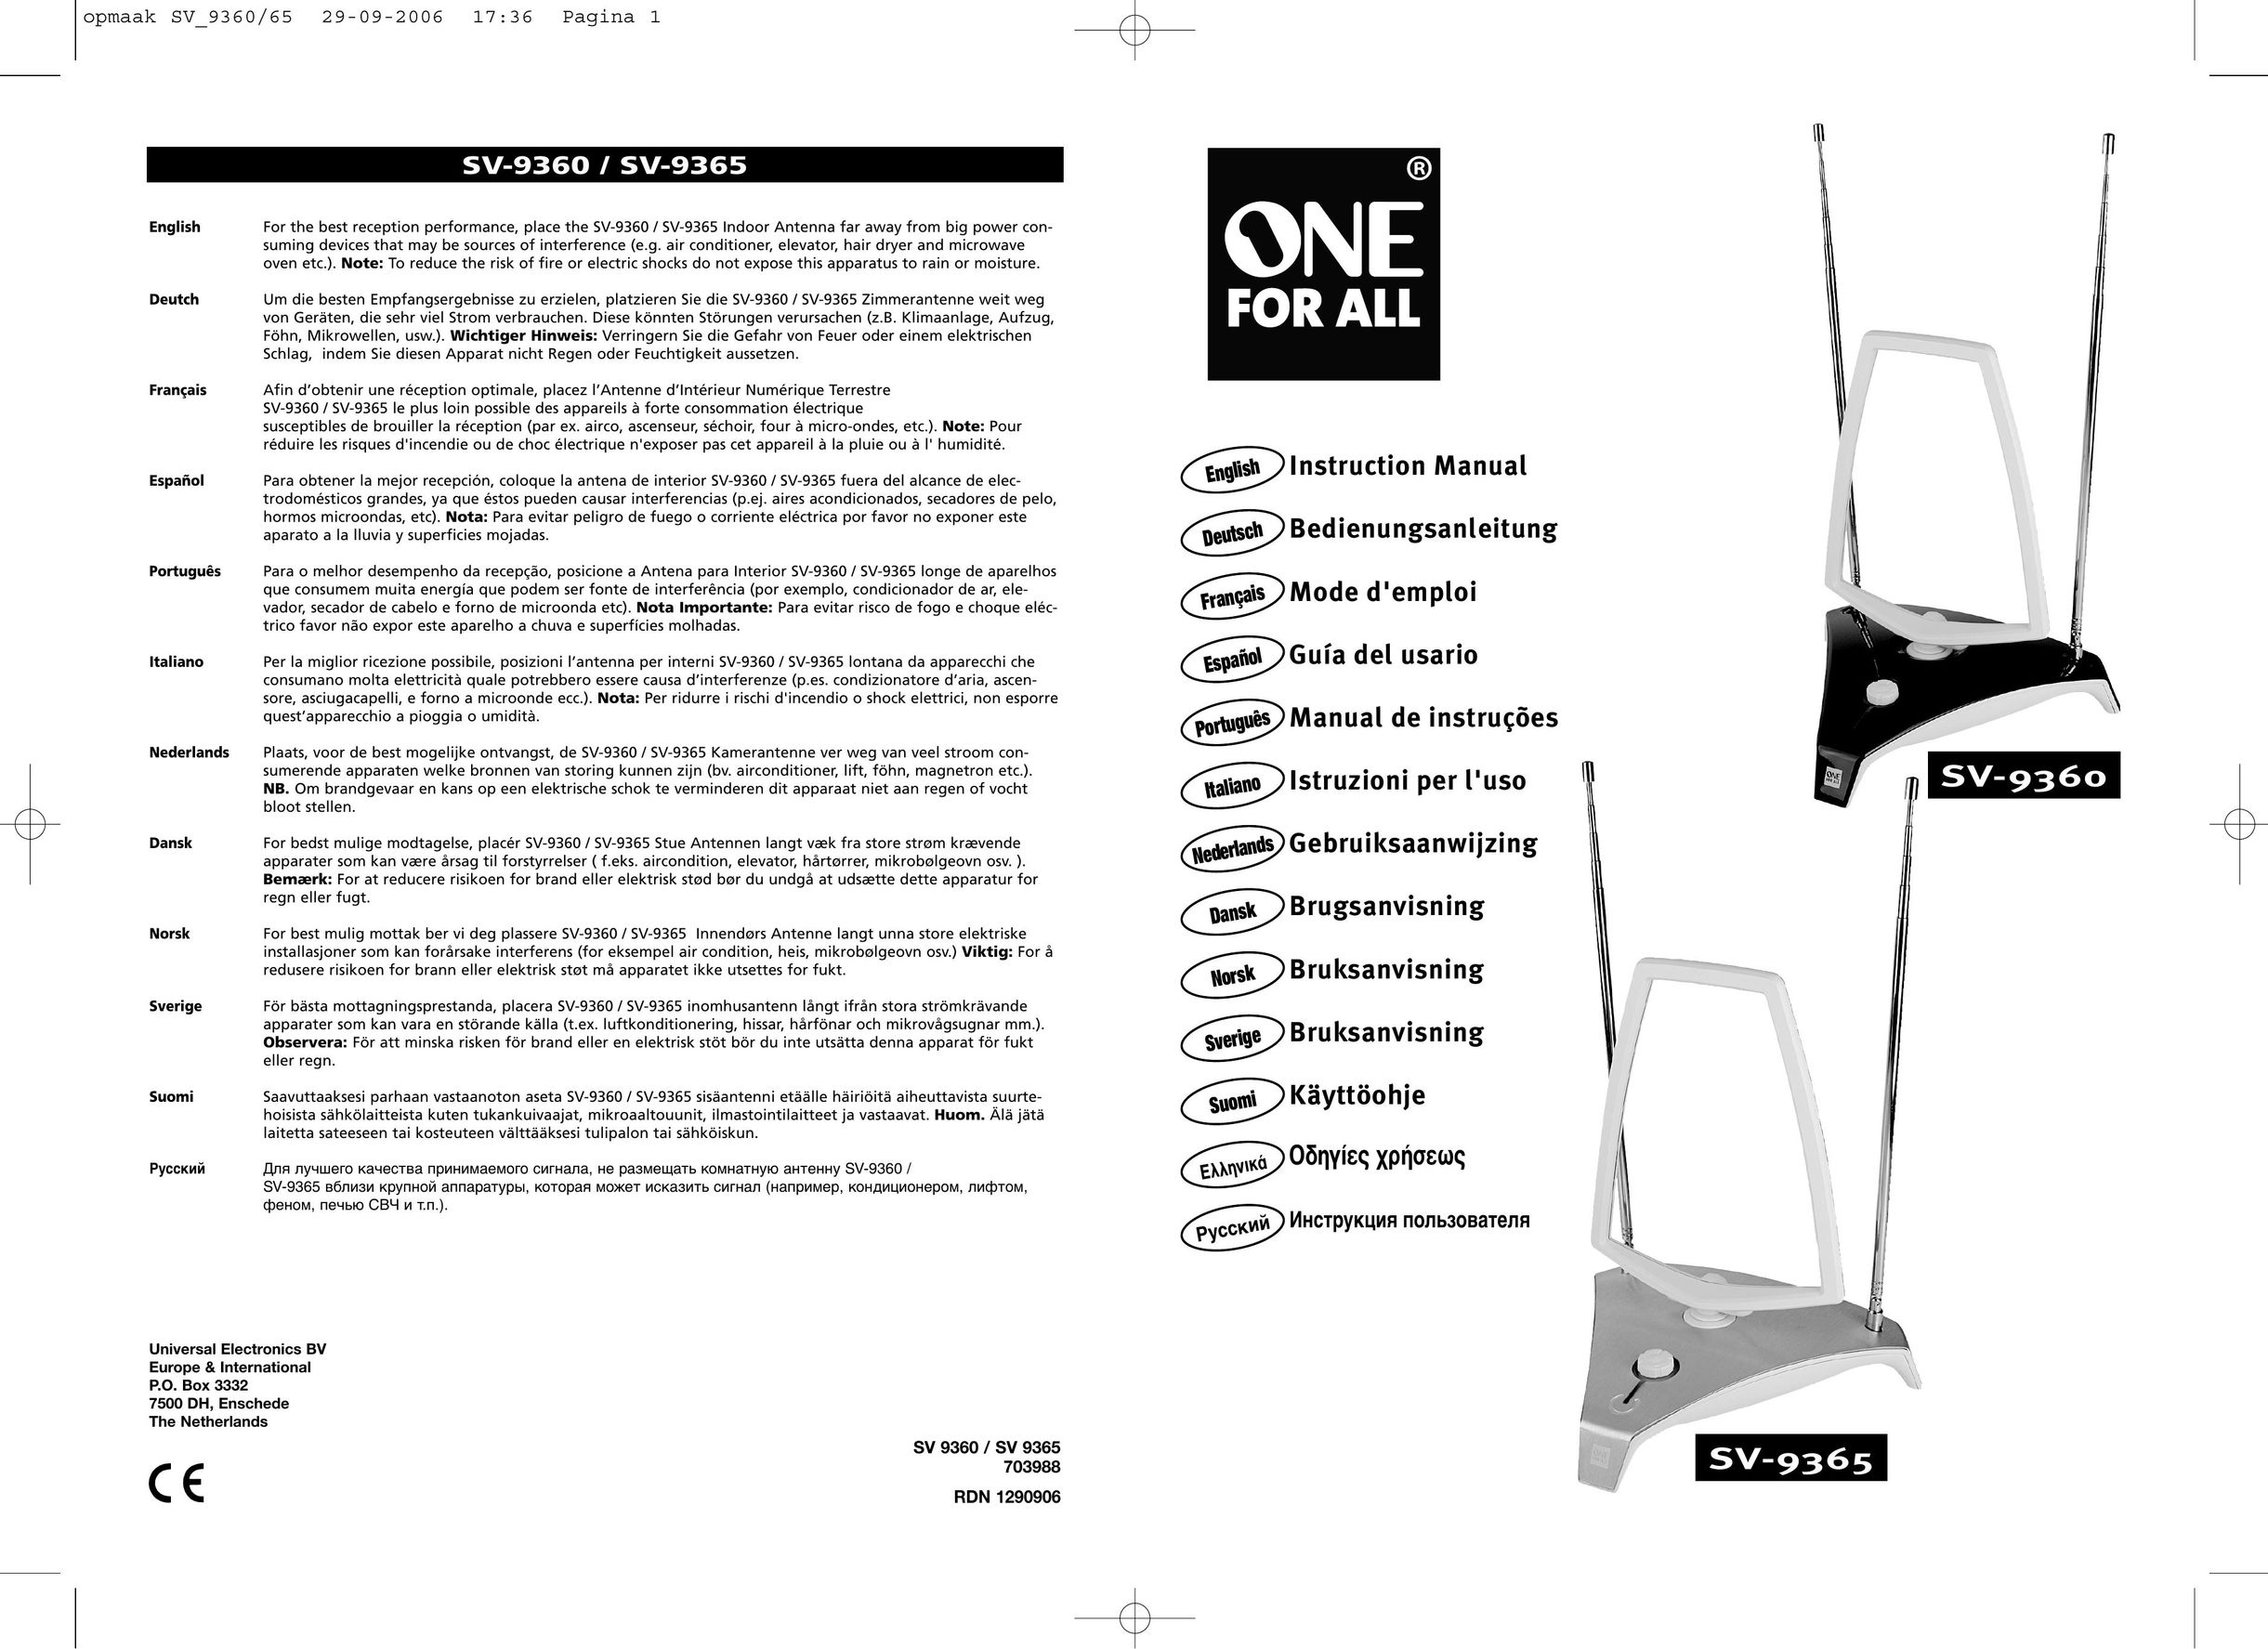 One for All SV-9360 TV Video Accessories User Manual